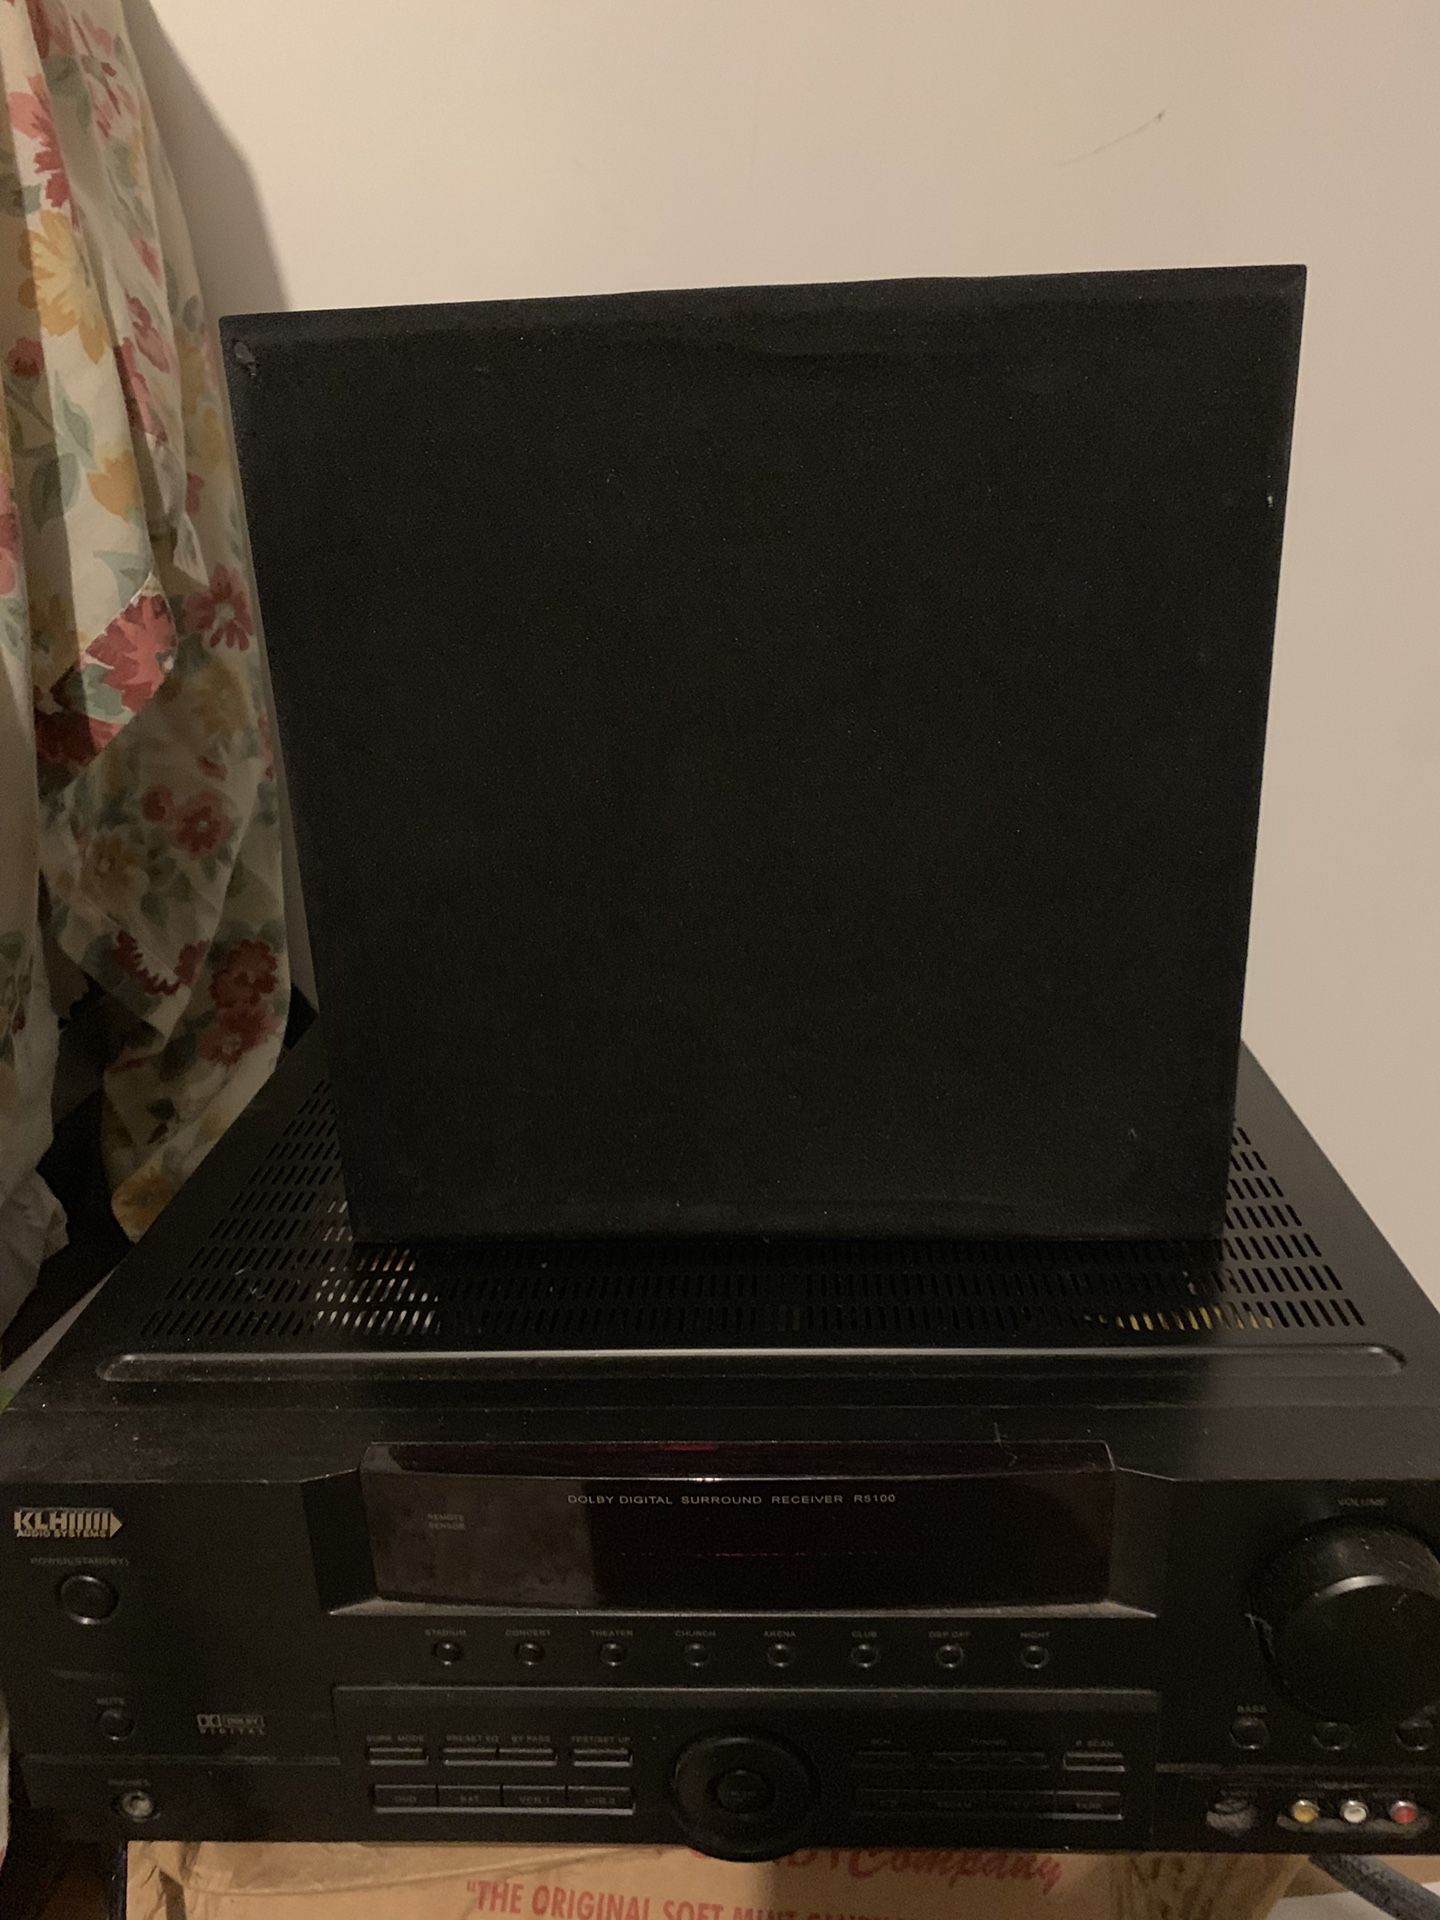 KLH receiver and audio source sub woofer